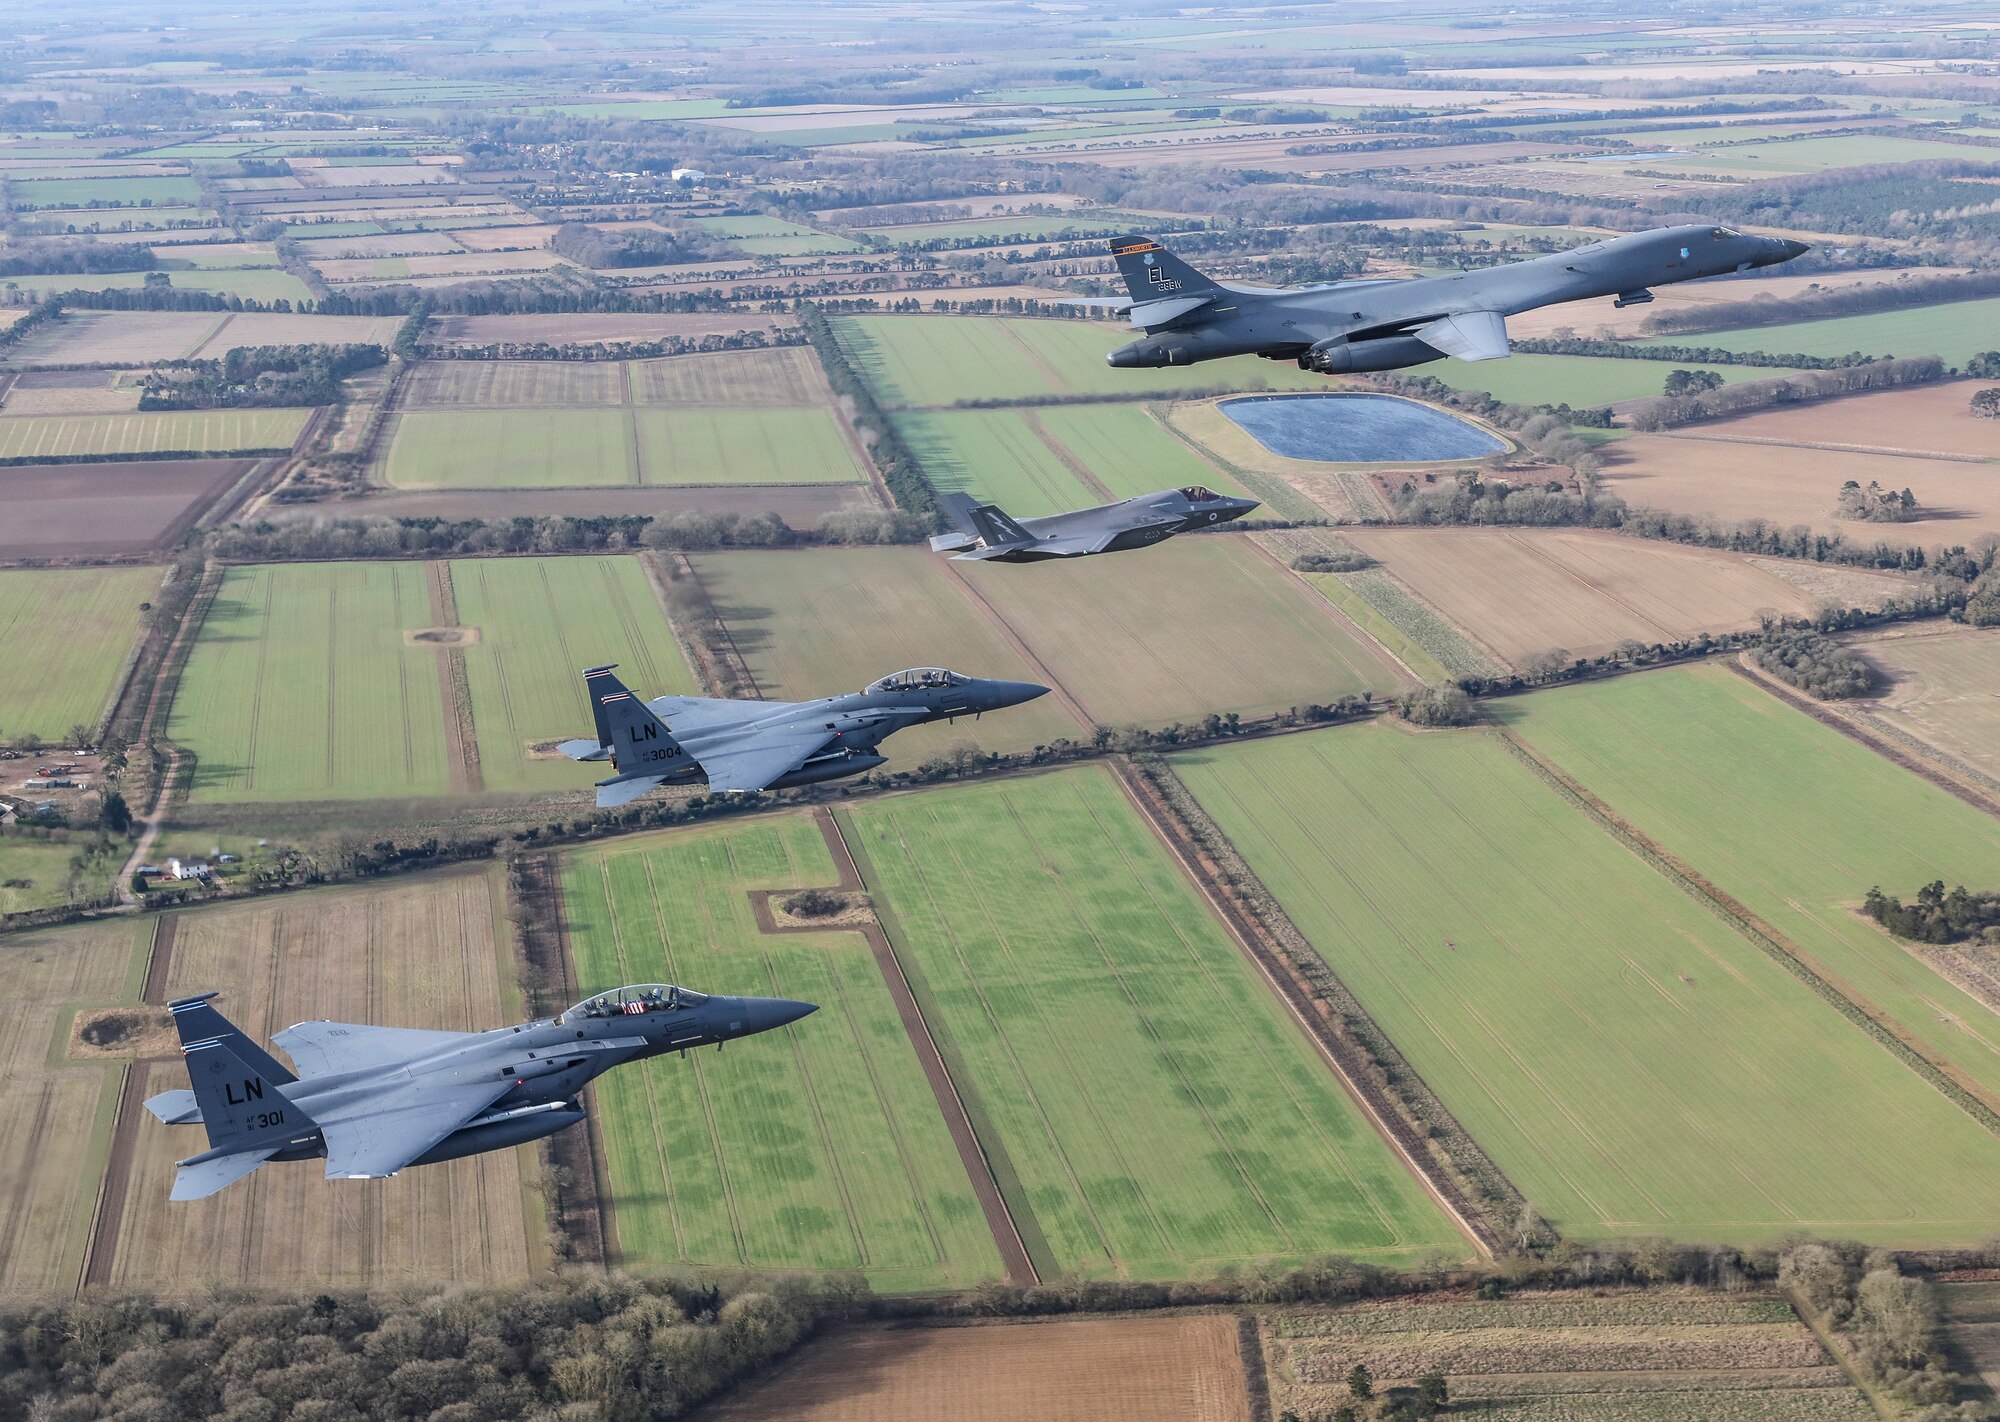 On 01 February 2022, F35B aircraft from Royal Air Force Marham joined US Air Force B1B and F15 aircraft for multiple fly-pasts over the United Kingdom to commemorate the 80th anniversary of the Eighth Air Force.

The Royal Air Force’s fifth-generation fighter jets joined the X strategic bombers, which had flown directly from the US, and X for the fly-pasts of both RAF Lakenheath and RAF Duxford. The location was pertinent as it was once home to an Eighth Air Force P-51 unit and now hosts the largest air museum in Europe.

Originally stood up on 1st February 1942 at Langley Field, Virginia, VIII Bomber Command moved to England a short while later, first to RAF Daws Hill and later to RAF High Wycombe, the RAF’s Bomber Command, where it established its wartime headquarters in the Wycombe Abbey School. The Eighth Air Force was a US Army Air Force Combat Air Force, focused on the European Theatre, that carried out strategic bombing of targets in France, the Low Countries and Germany.

Eighth Air Force and Joint-Global Strike Operations Center commander, Major General. Andrew Gebara said “The Eighth Air Force has a long, rich history that dates back to World War II. Not only does this flight signify the longevity and reach of the United States’ bomber force, but it pays tribute to our UK allies as well. Eighth Air Force has had a close relationship with the Royal Air Force since its beginning.”

On 22nd February 1944, the US reorganised its Air Forces in Europe by renaming Eighth Air Force as the United States Strategic Air Forces in Europe, which is today known as United States Air Forces in Europe.